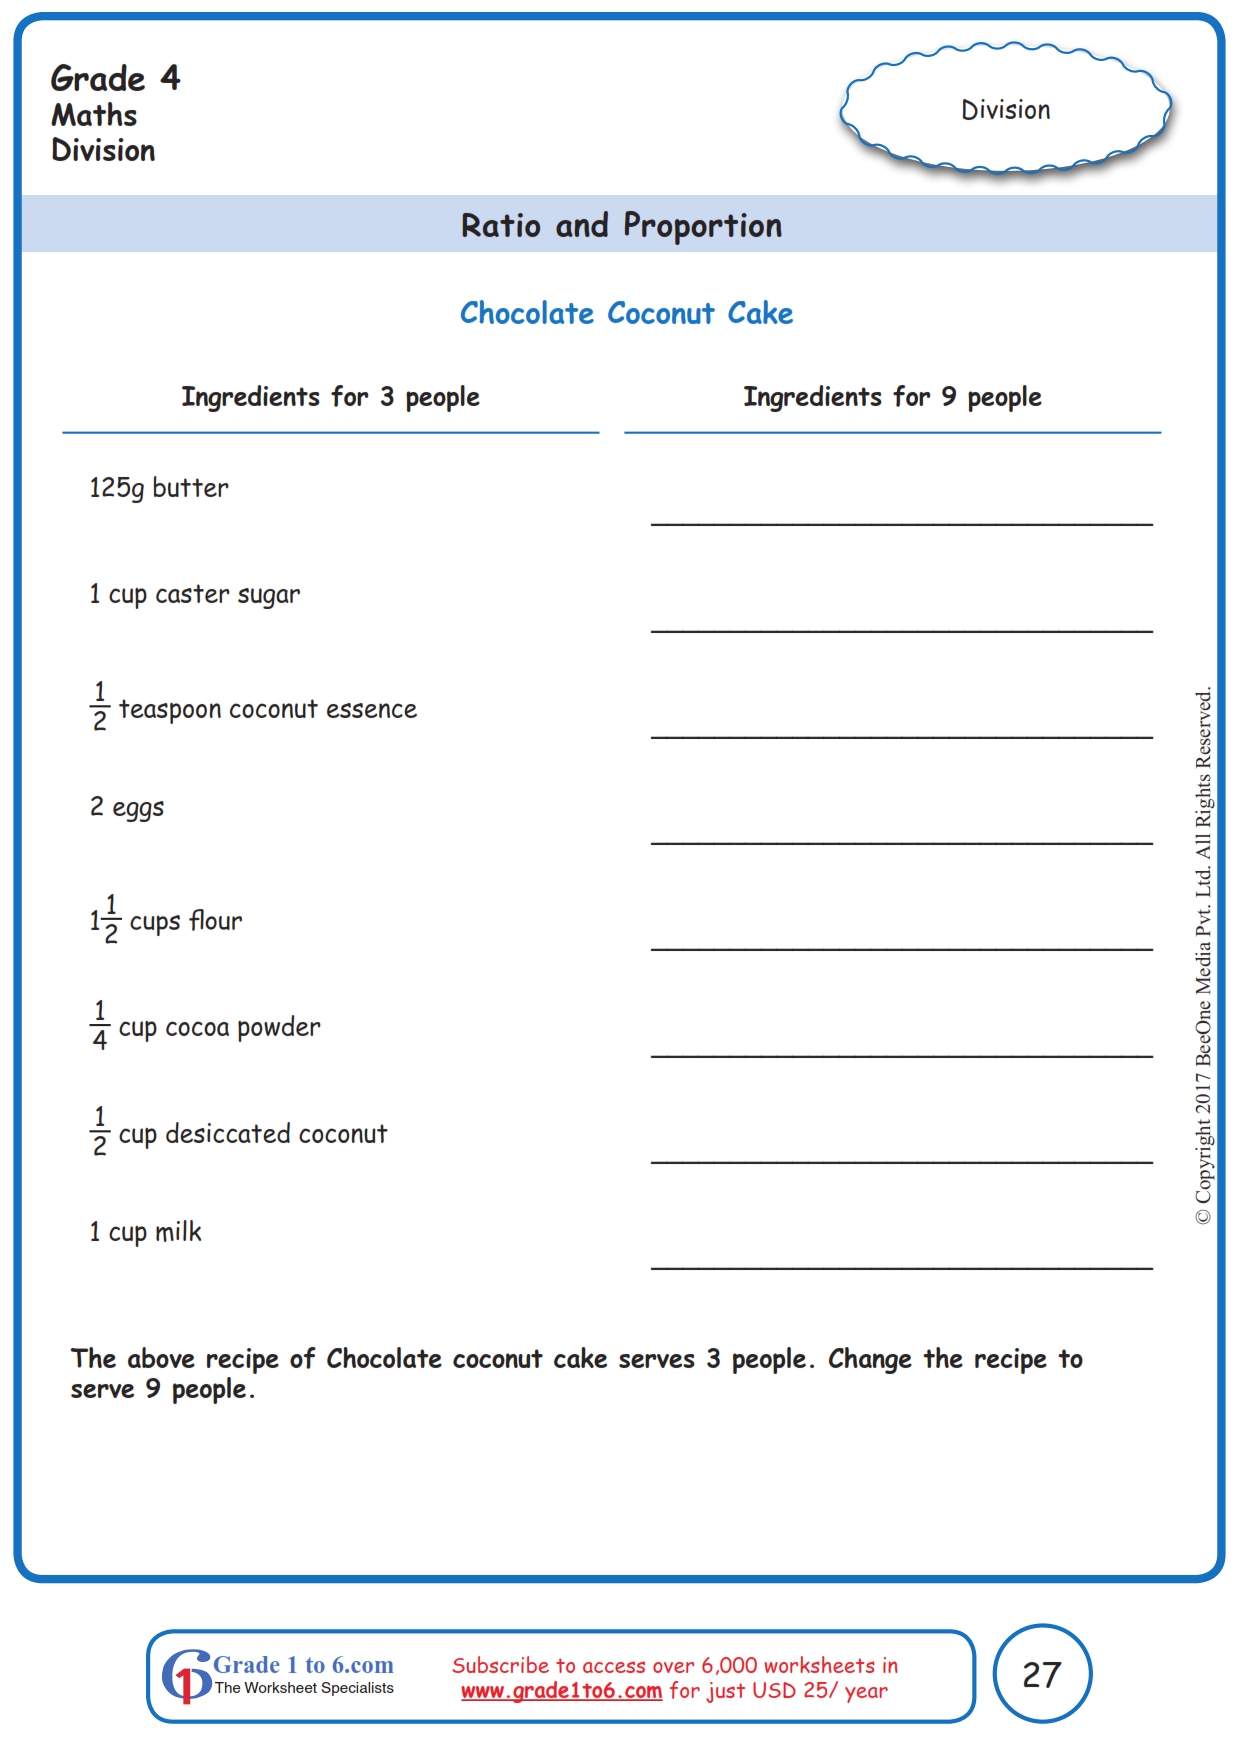 Grade 22 Ratio & Proportion Worksheetswww.grade22to22.com In Ratio And Proportion Worksheet